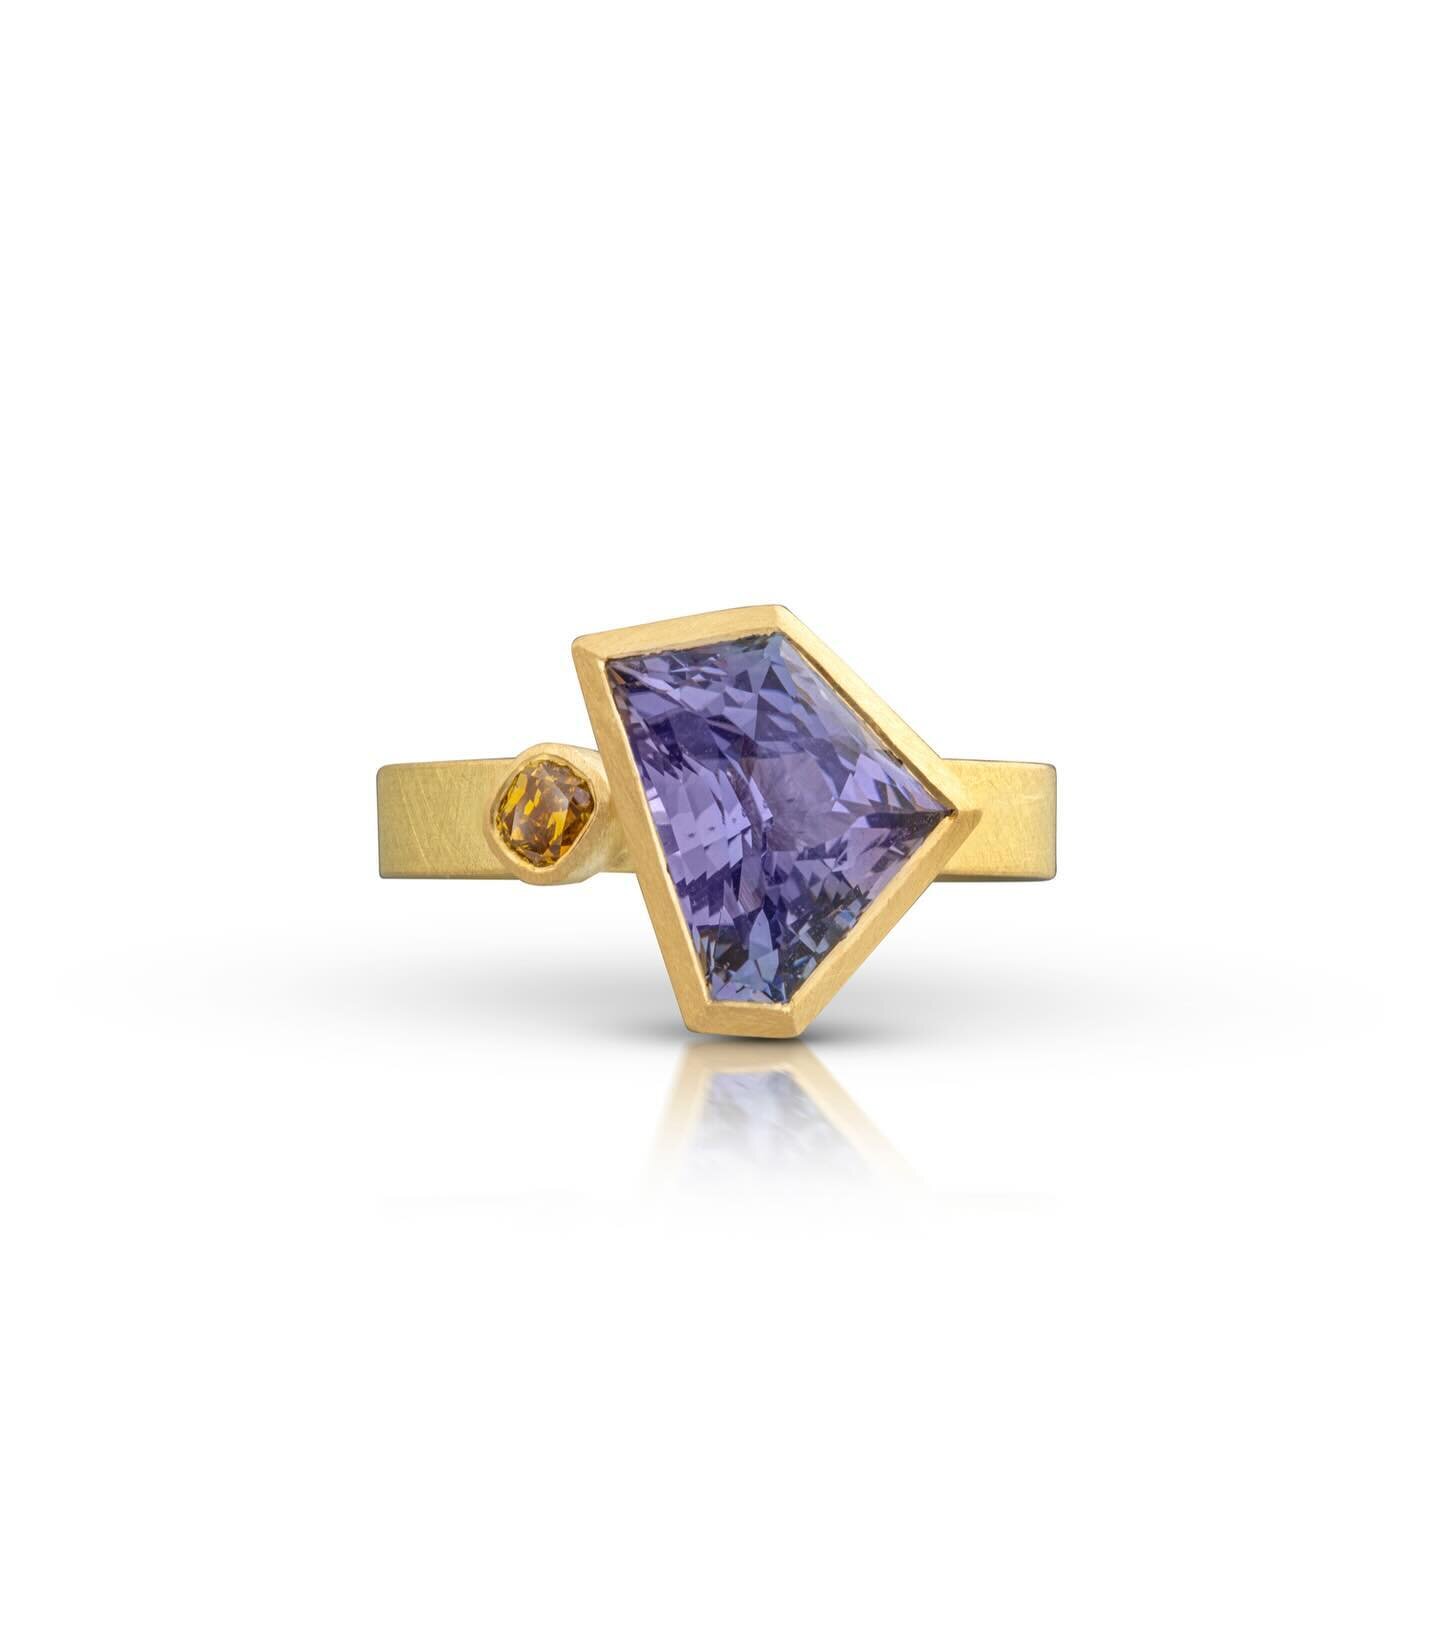 Stunning unheated tanzanite with little yellow diamond companion. Cut in my own unique freeform style and set in 18ct yellow gold. Love the violet colours in this exquisite gem. 
#gemcutter #goldsmith #unheatedtanzanite #modernjewels #modernring #con